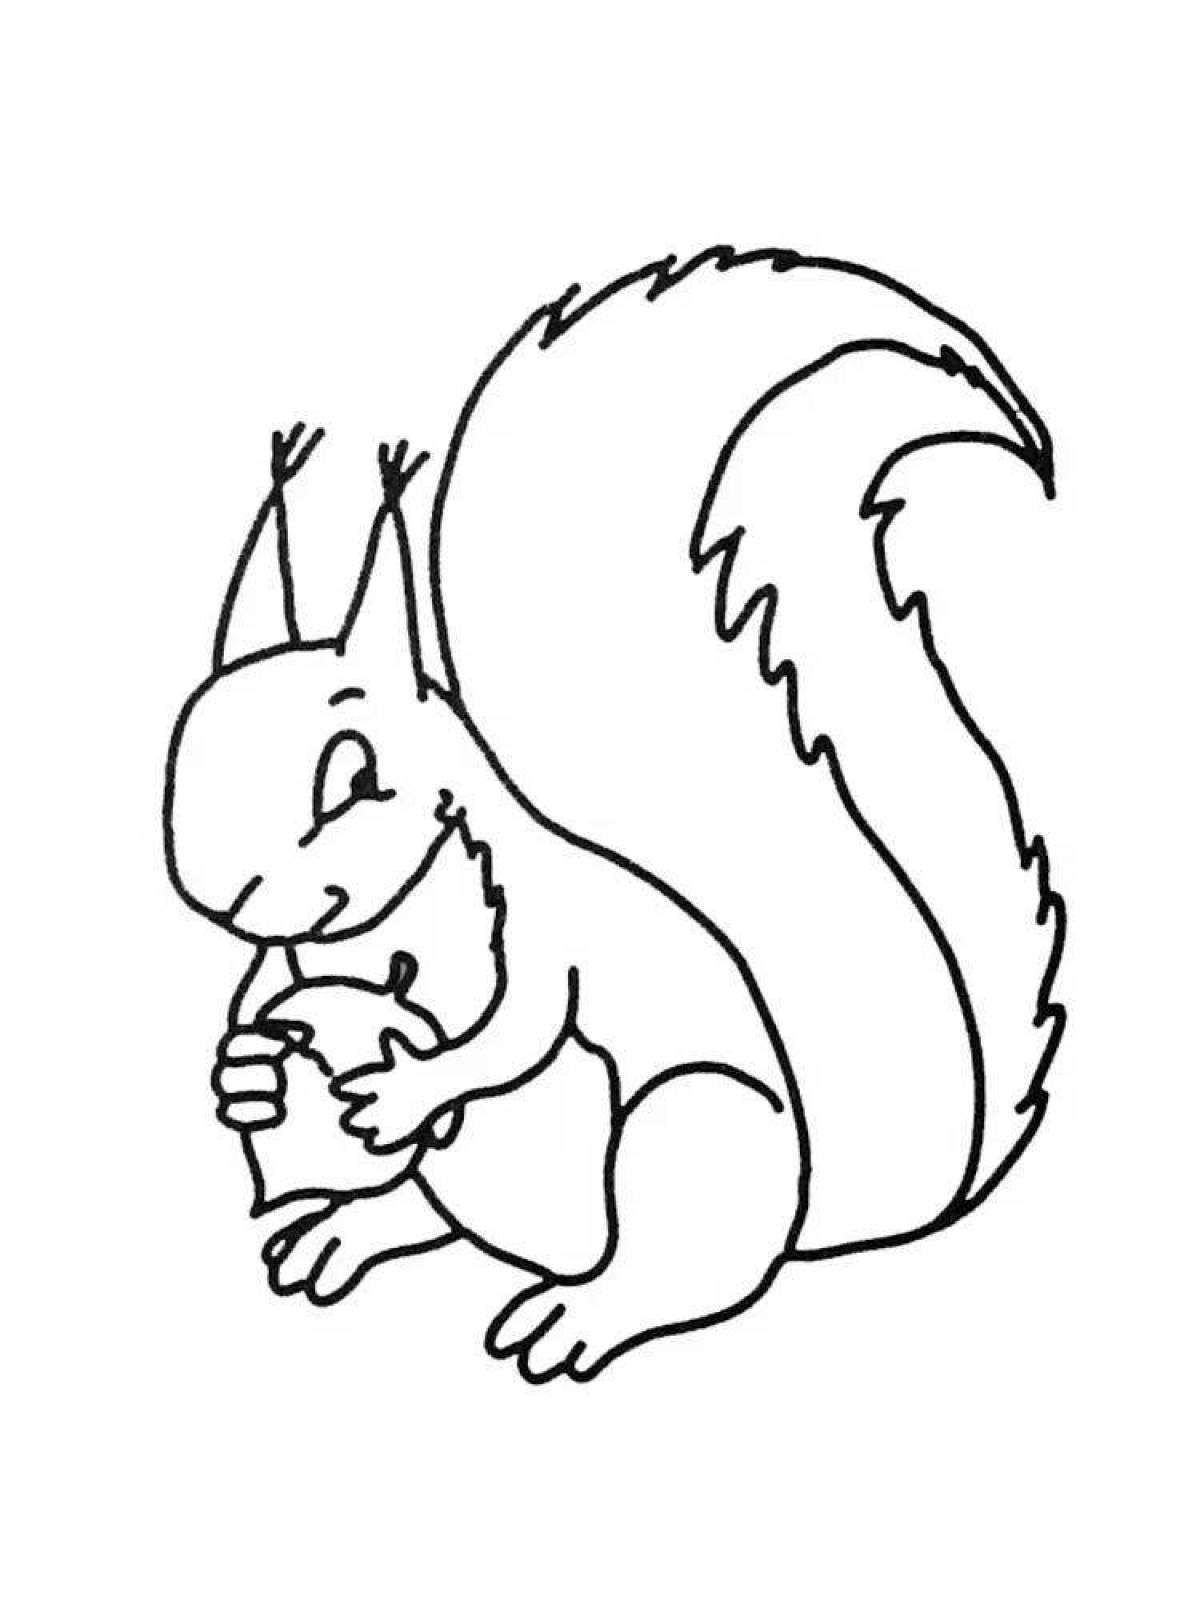 Squirrel playful coloring for kids